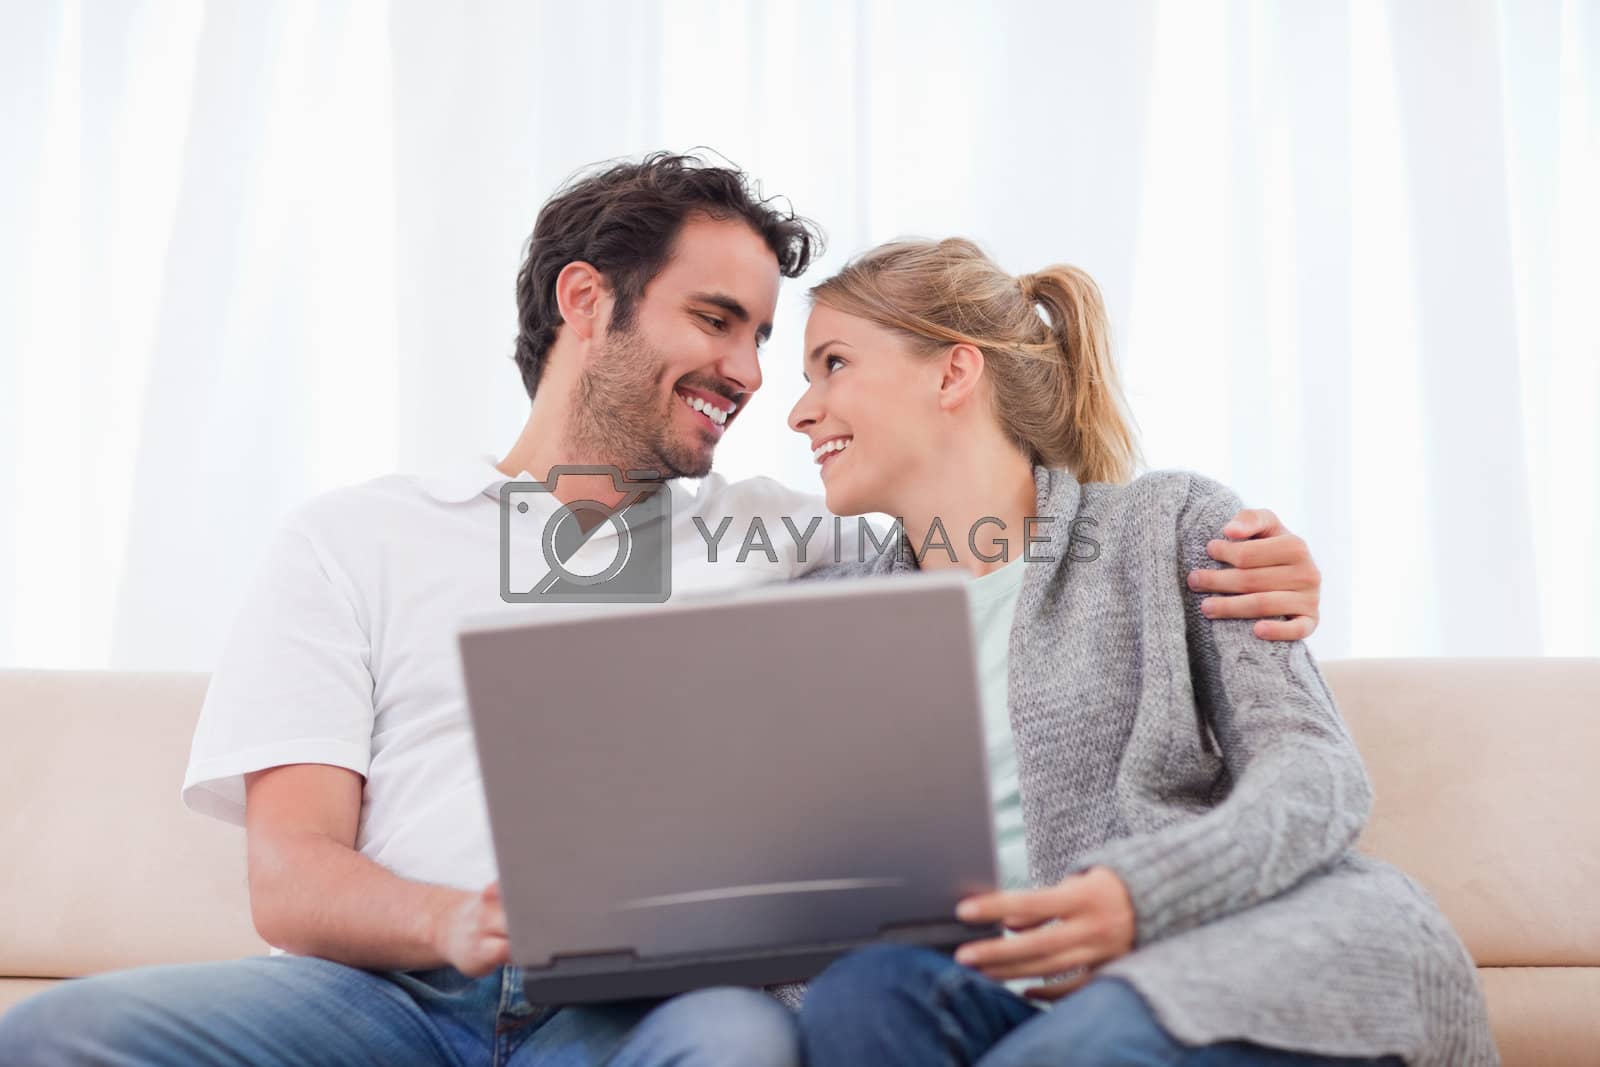 Royalty free image of Happy couple using a laptop by Wavebreakmedia